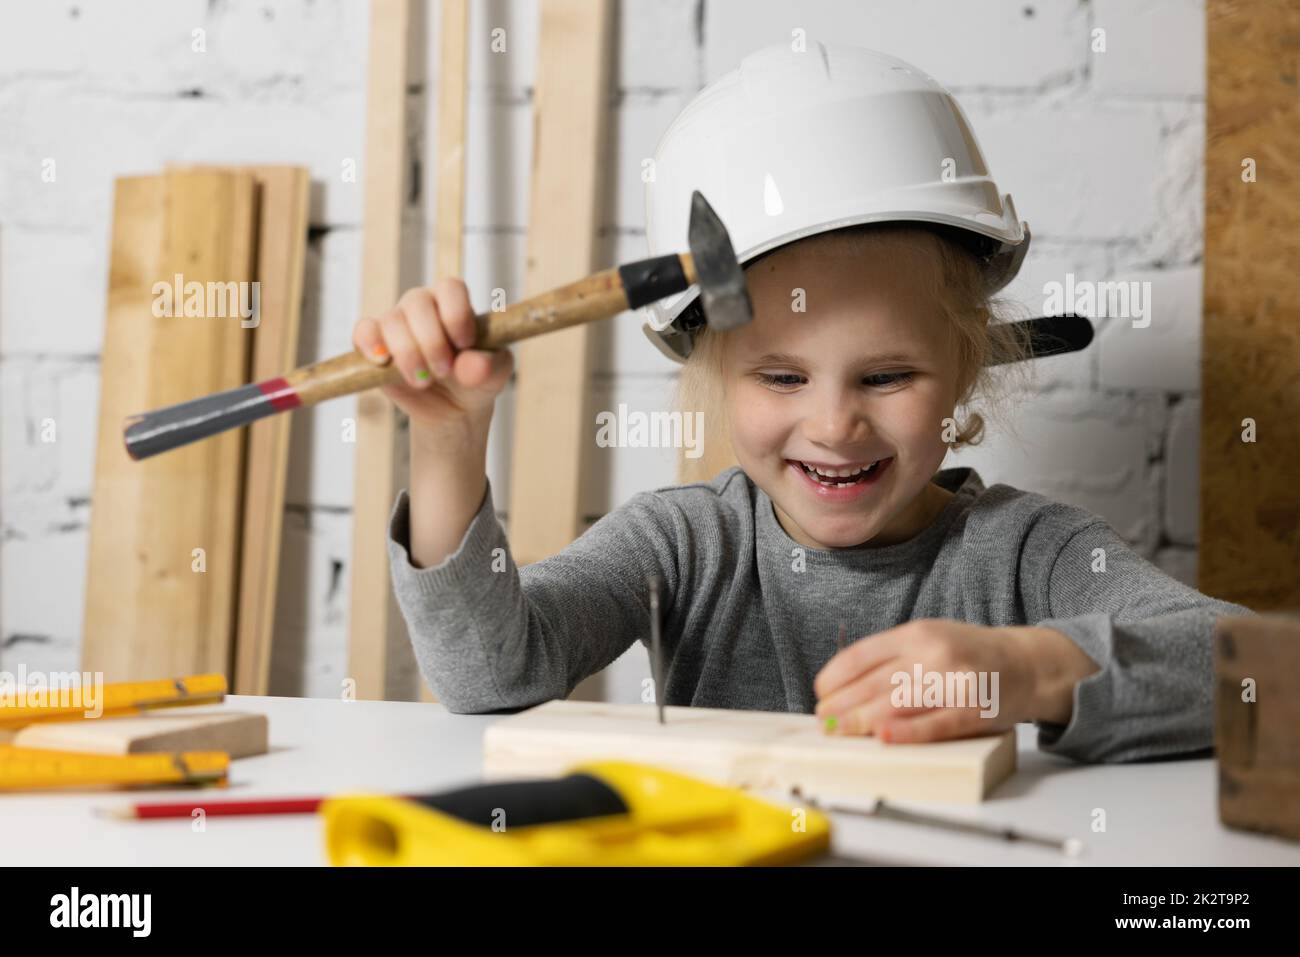 happy little girl with helmet try to hammer a nail in workshop. craft education Stock Photo